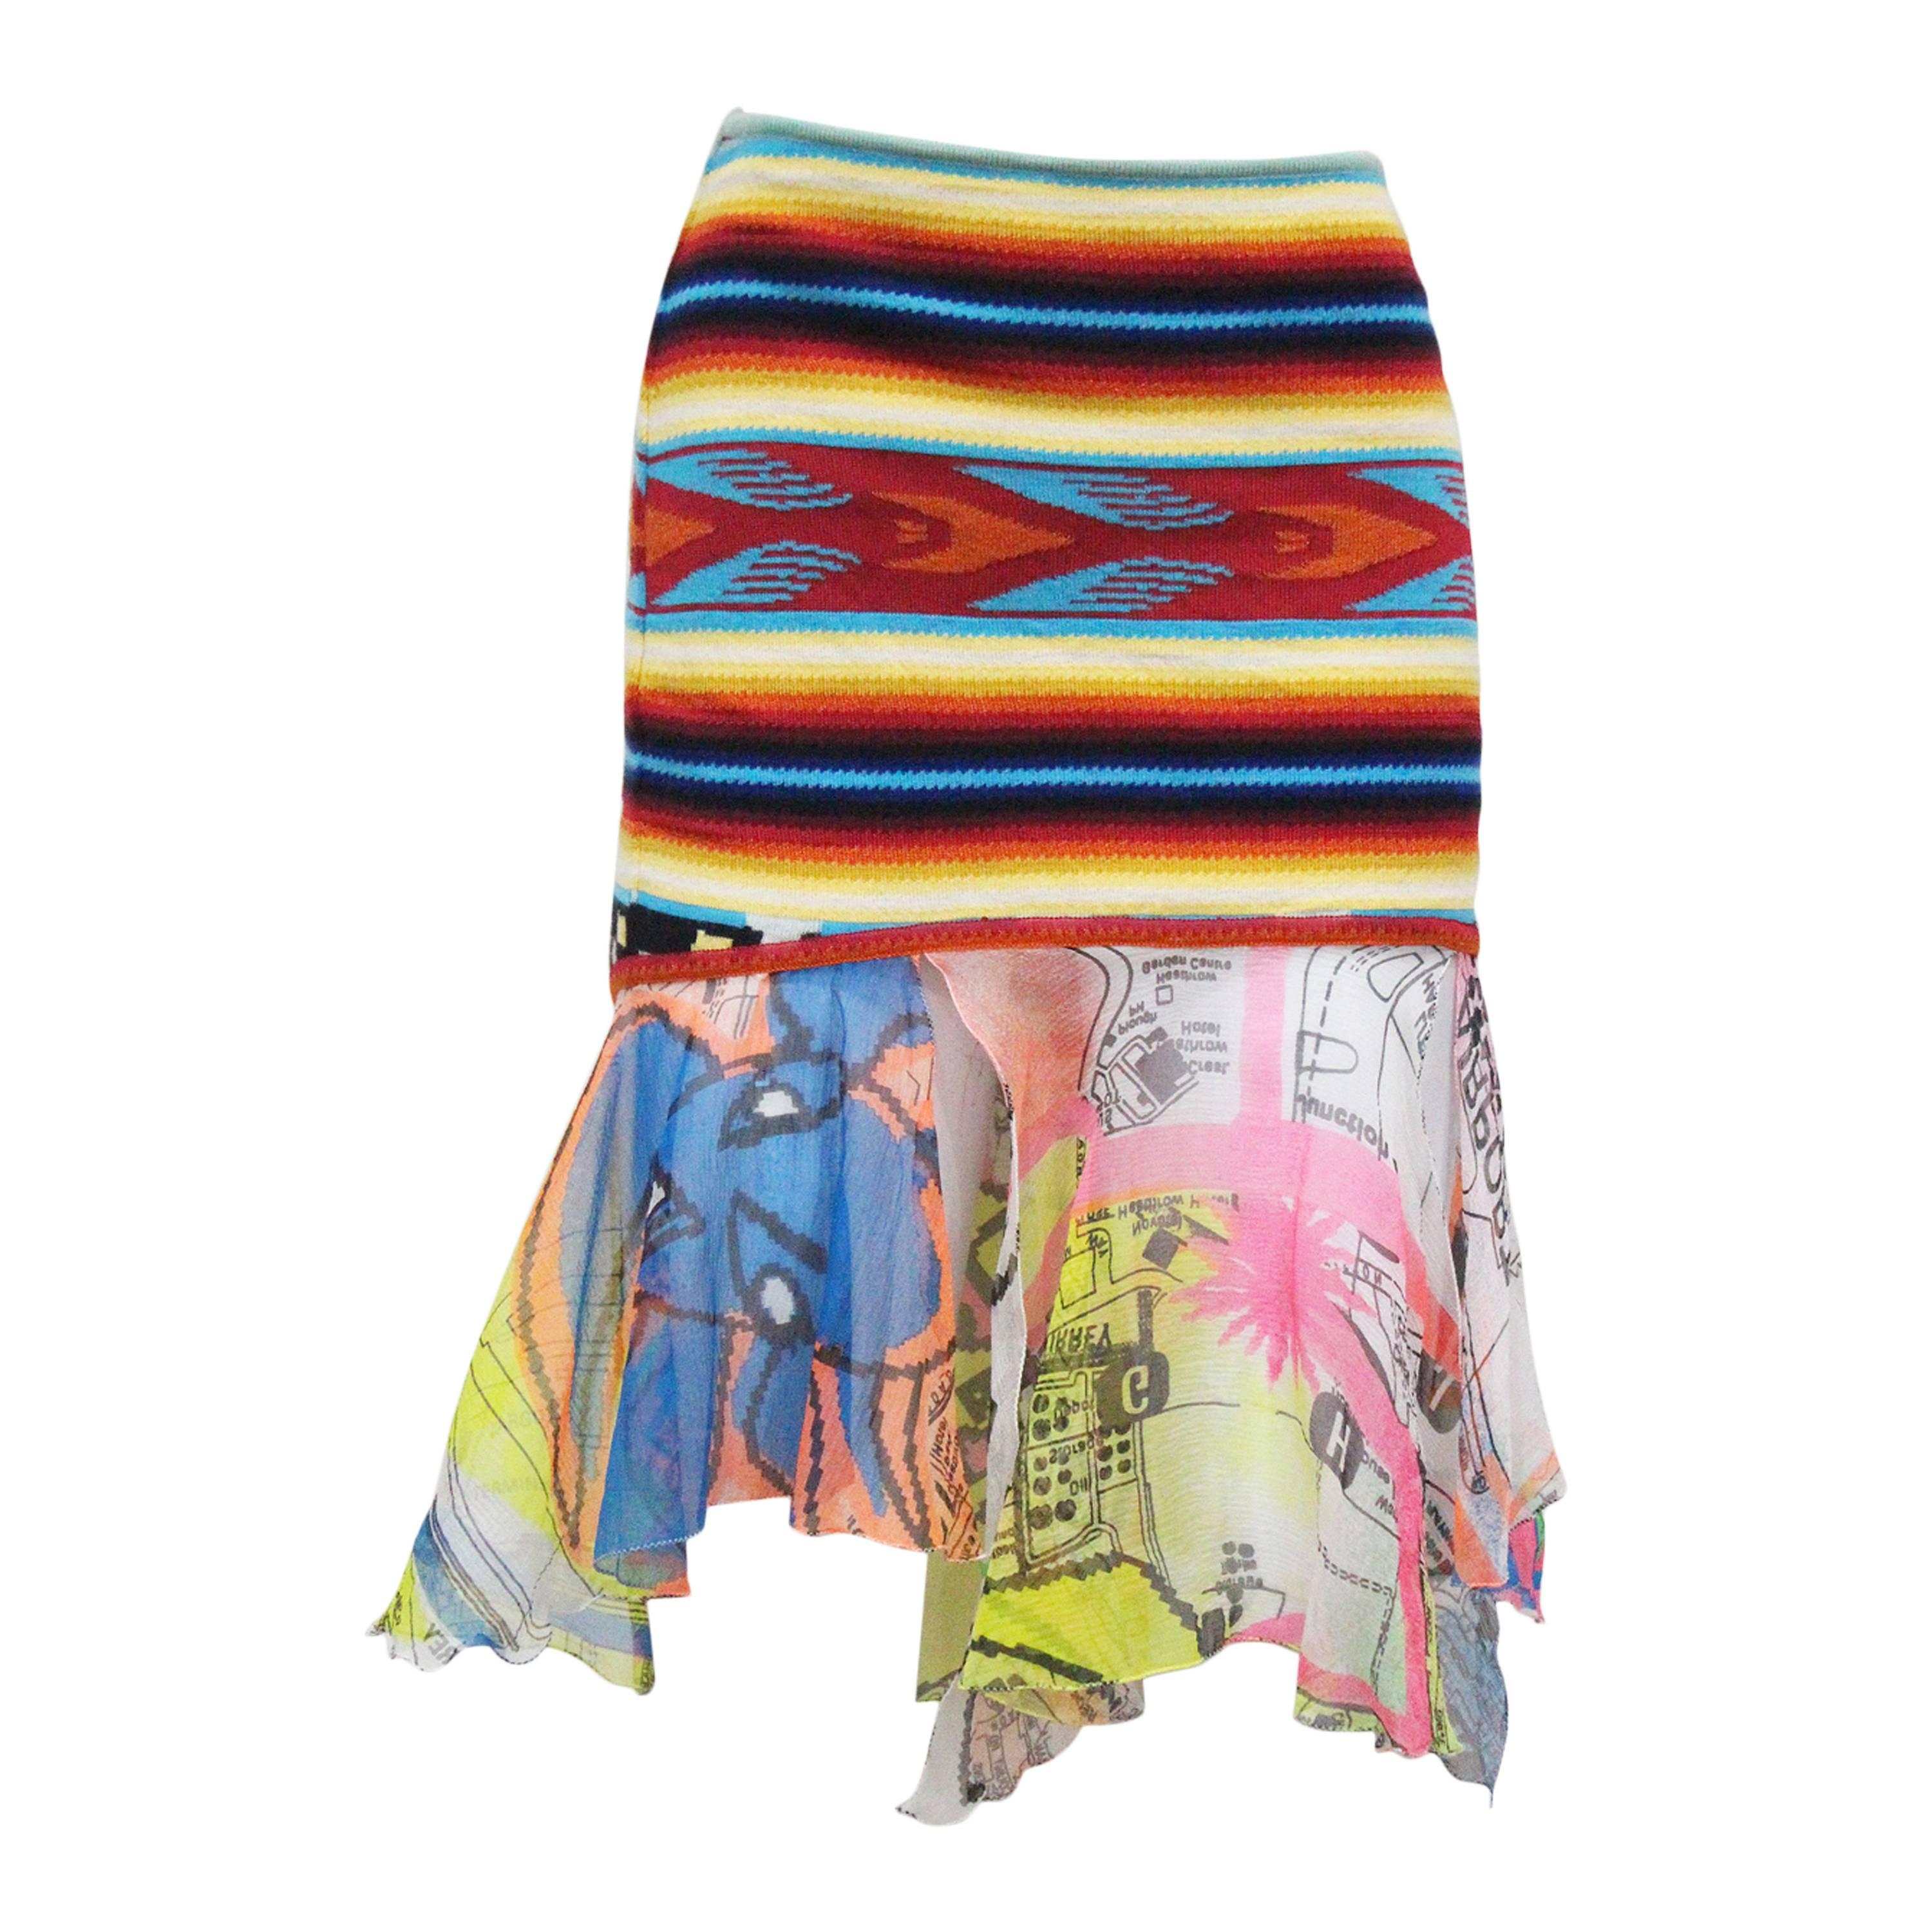 Christian Dior by John Galliano tribal knitted skirt, c. 2001